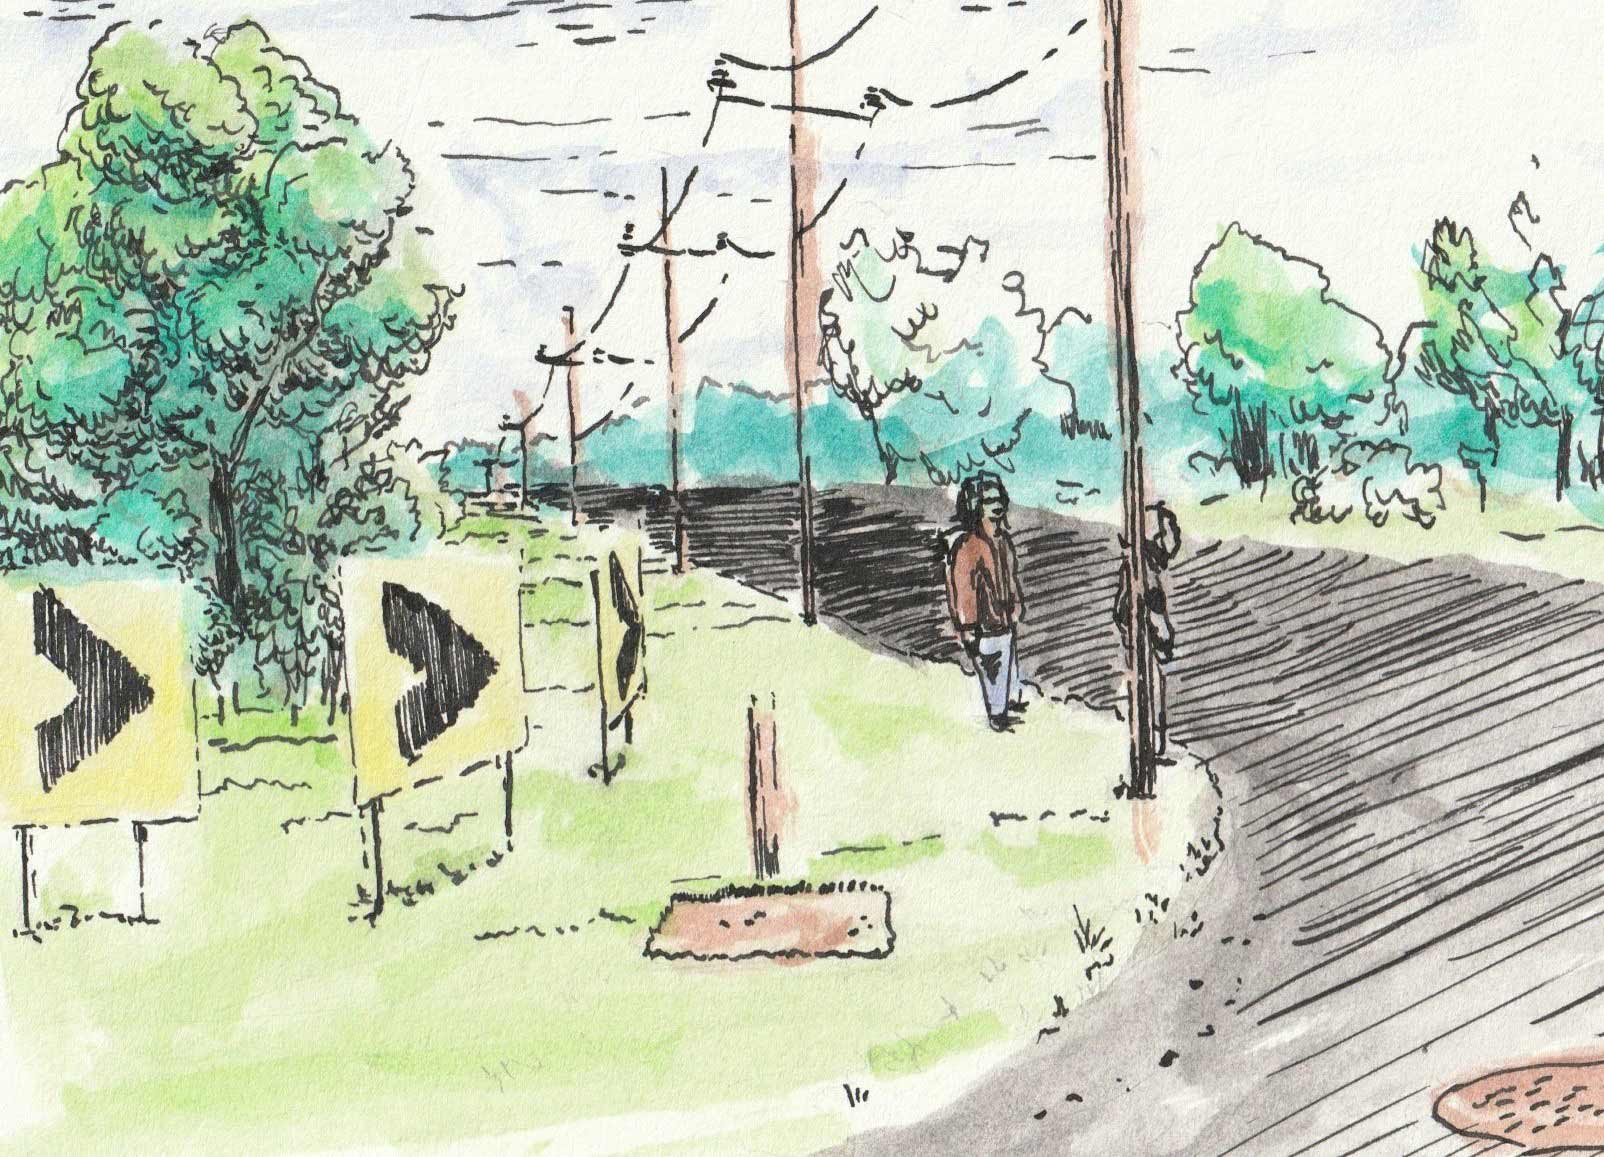 Small watercolor drawing of two people standing near some telephone poles on the side of a rural road.